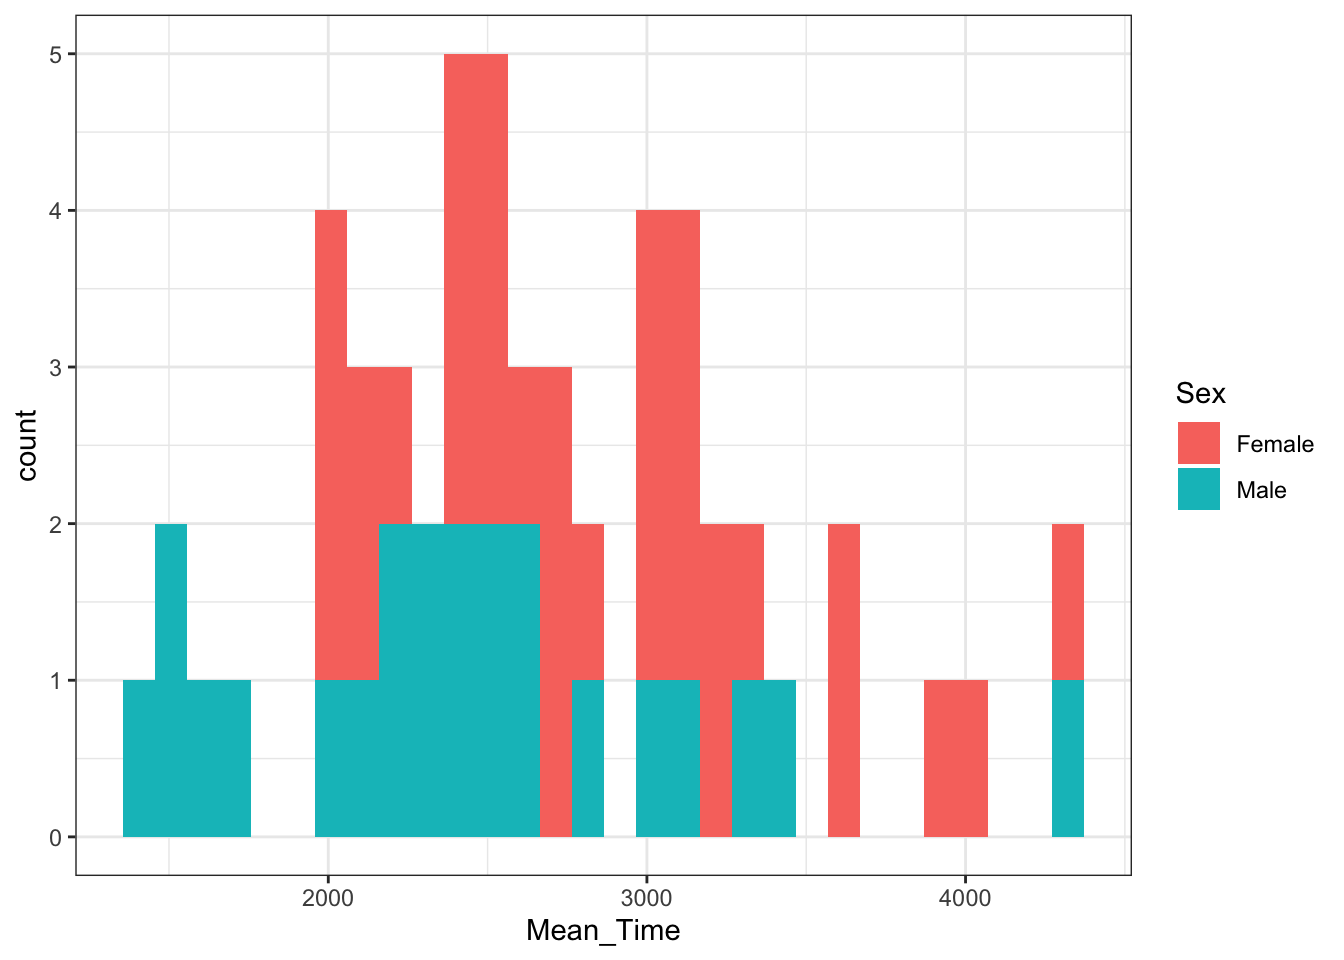 A histogram of distribution of Mean Time counts by Sex